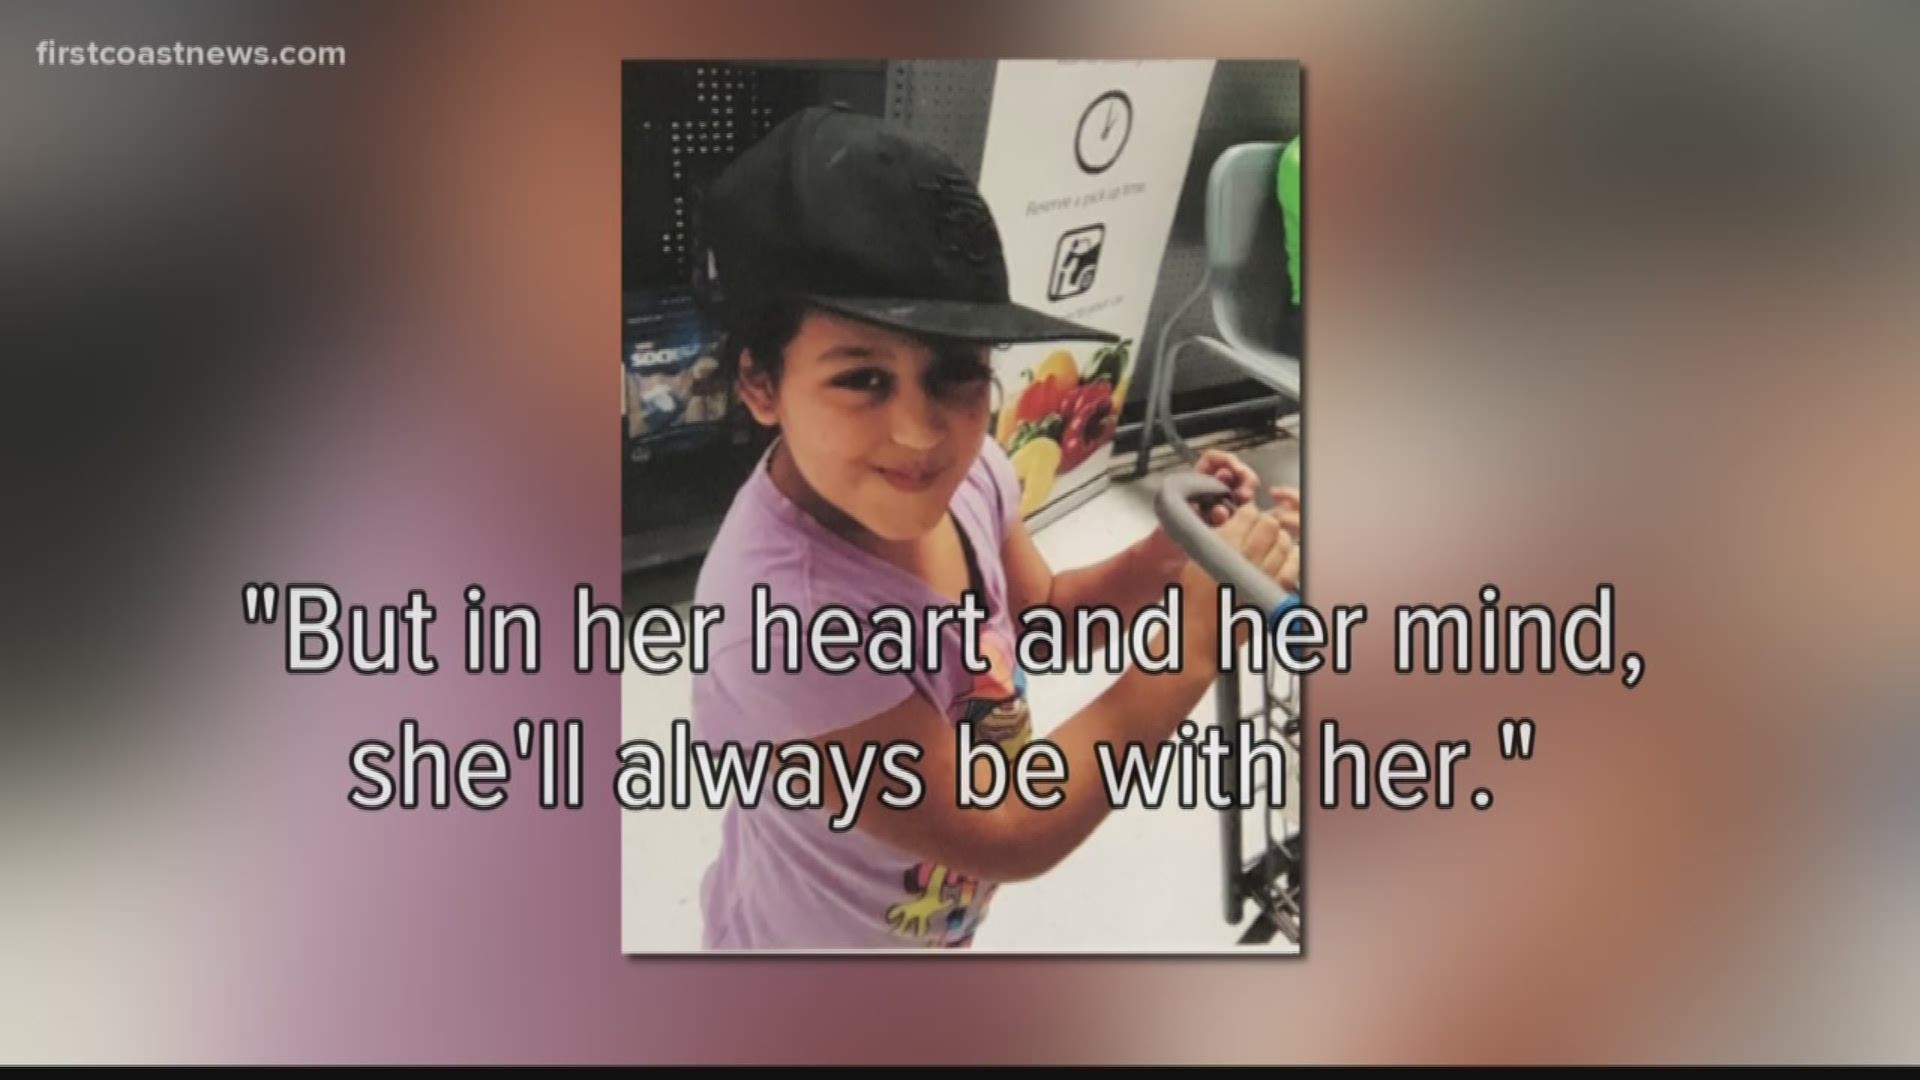 Jacksonville Sheriff's Office reported that a 7-year-old girl, Heidy Rivas Villanueva, was shot and killed on the Westside Saturday evening.